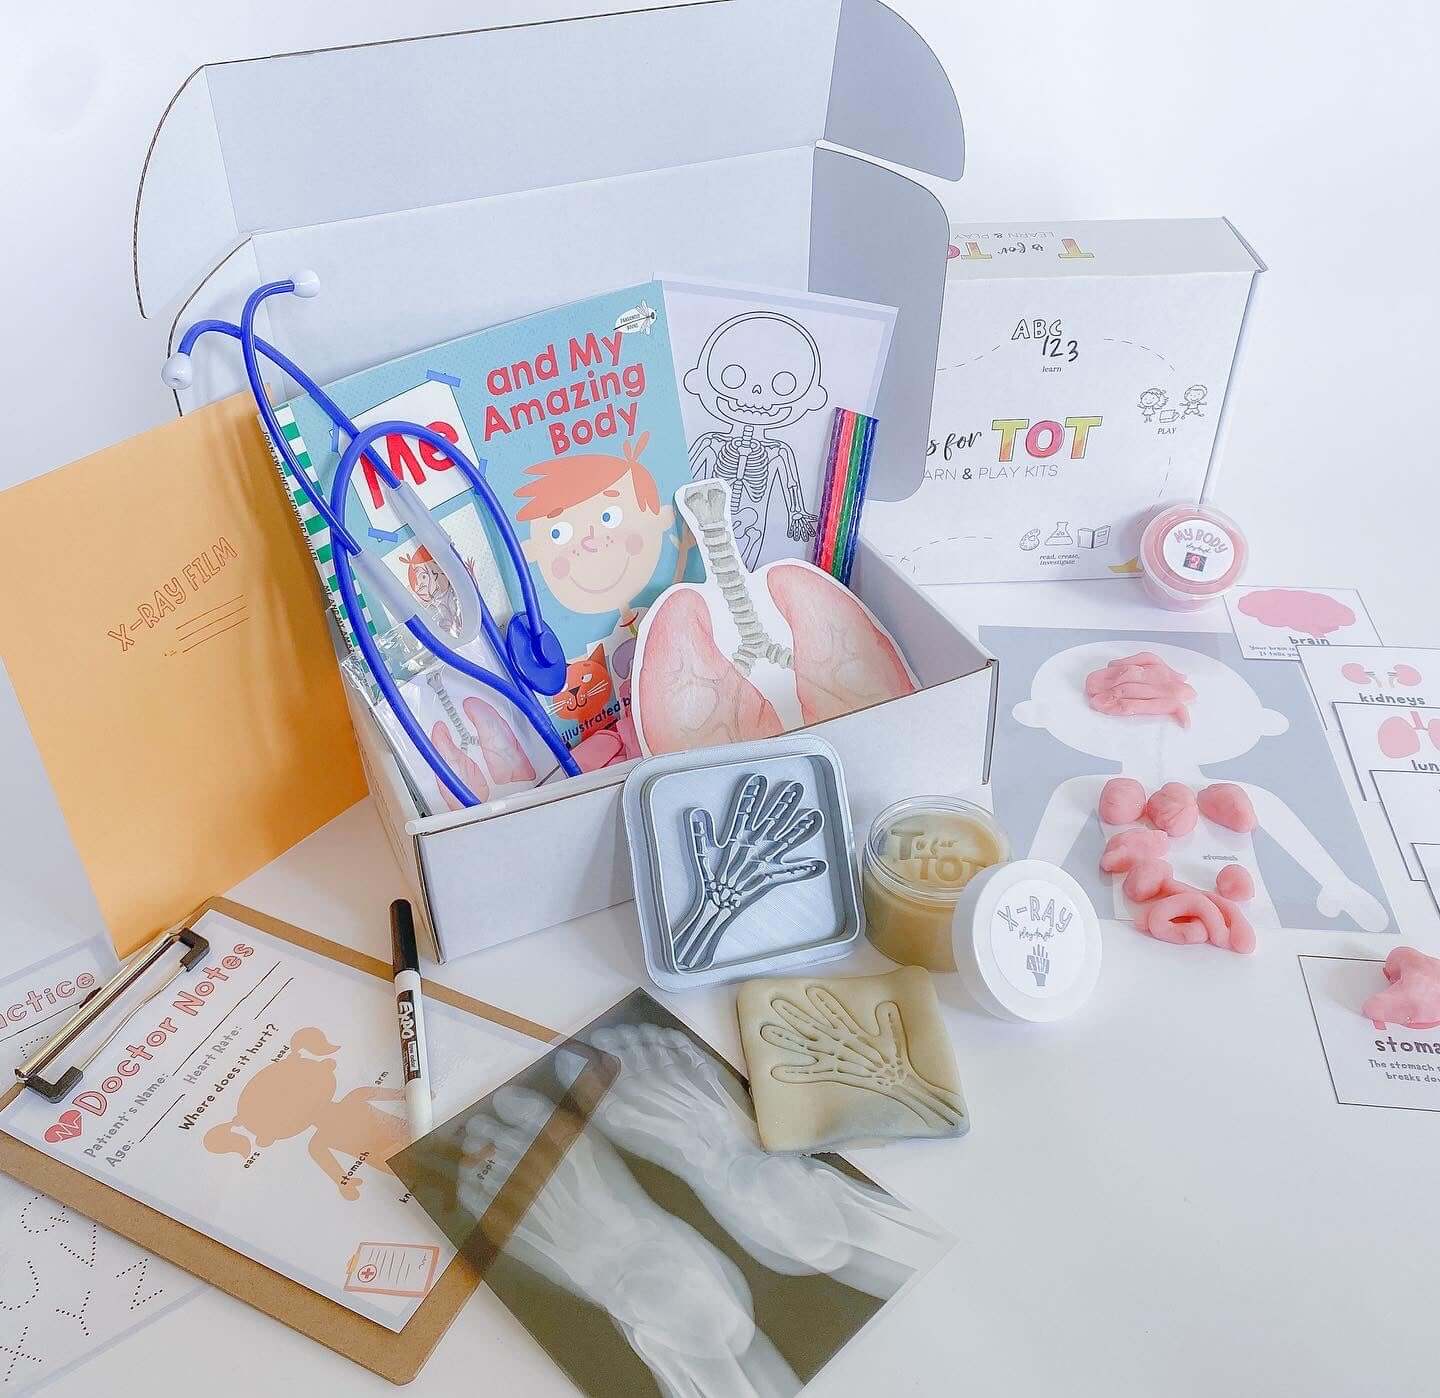 Play and learn kit for kids aged 3-6 focused on the human body. Features a book, x-ray images, homemade playdough, a lung experiment, organ placement mat, and a real working stethoscope.